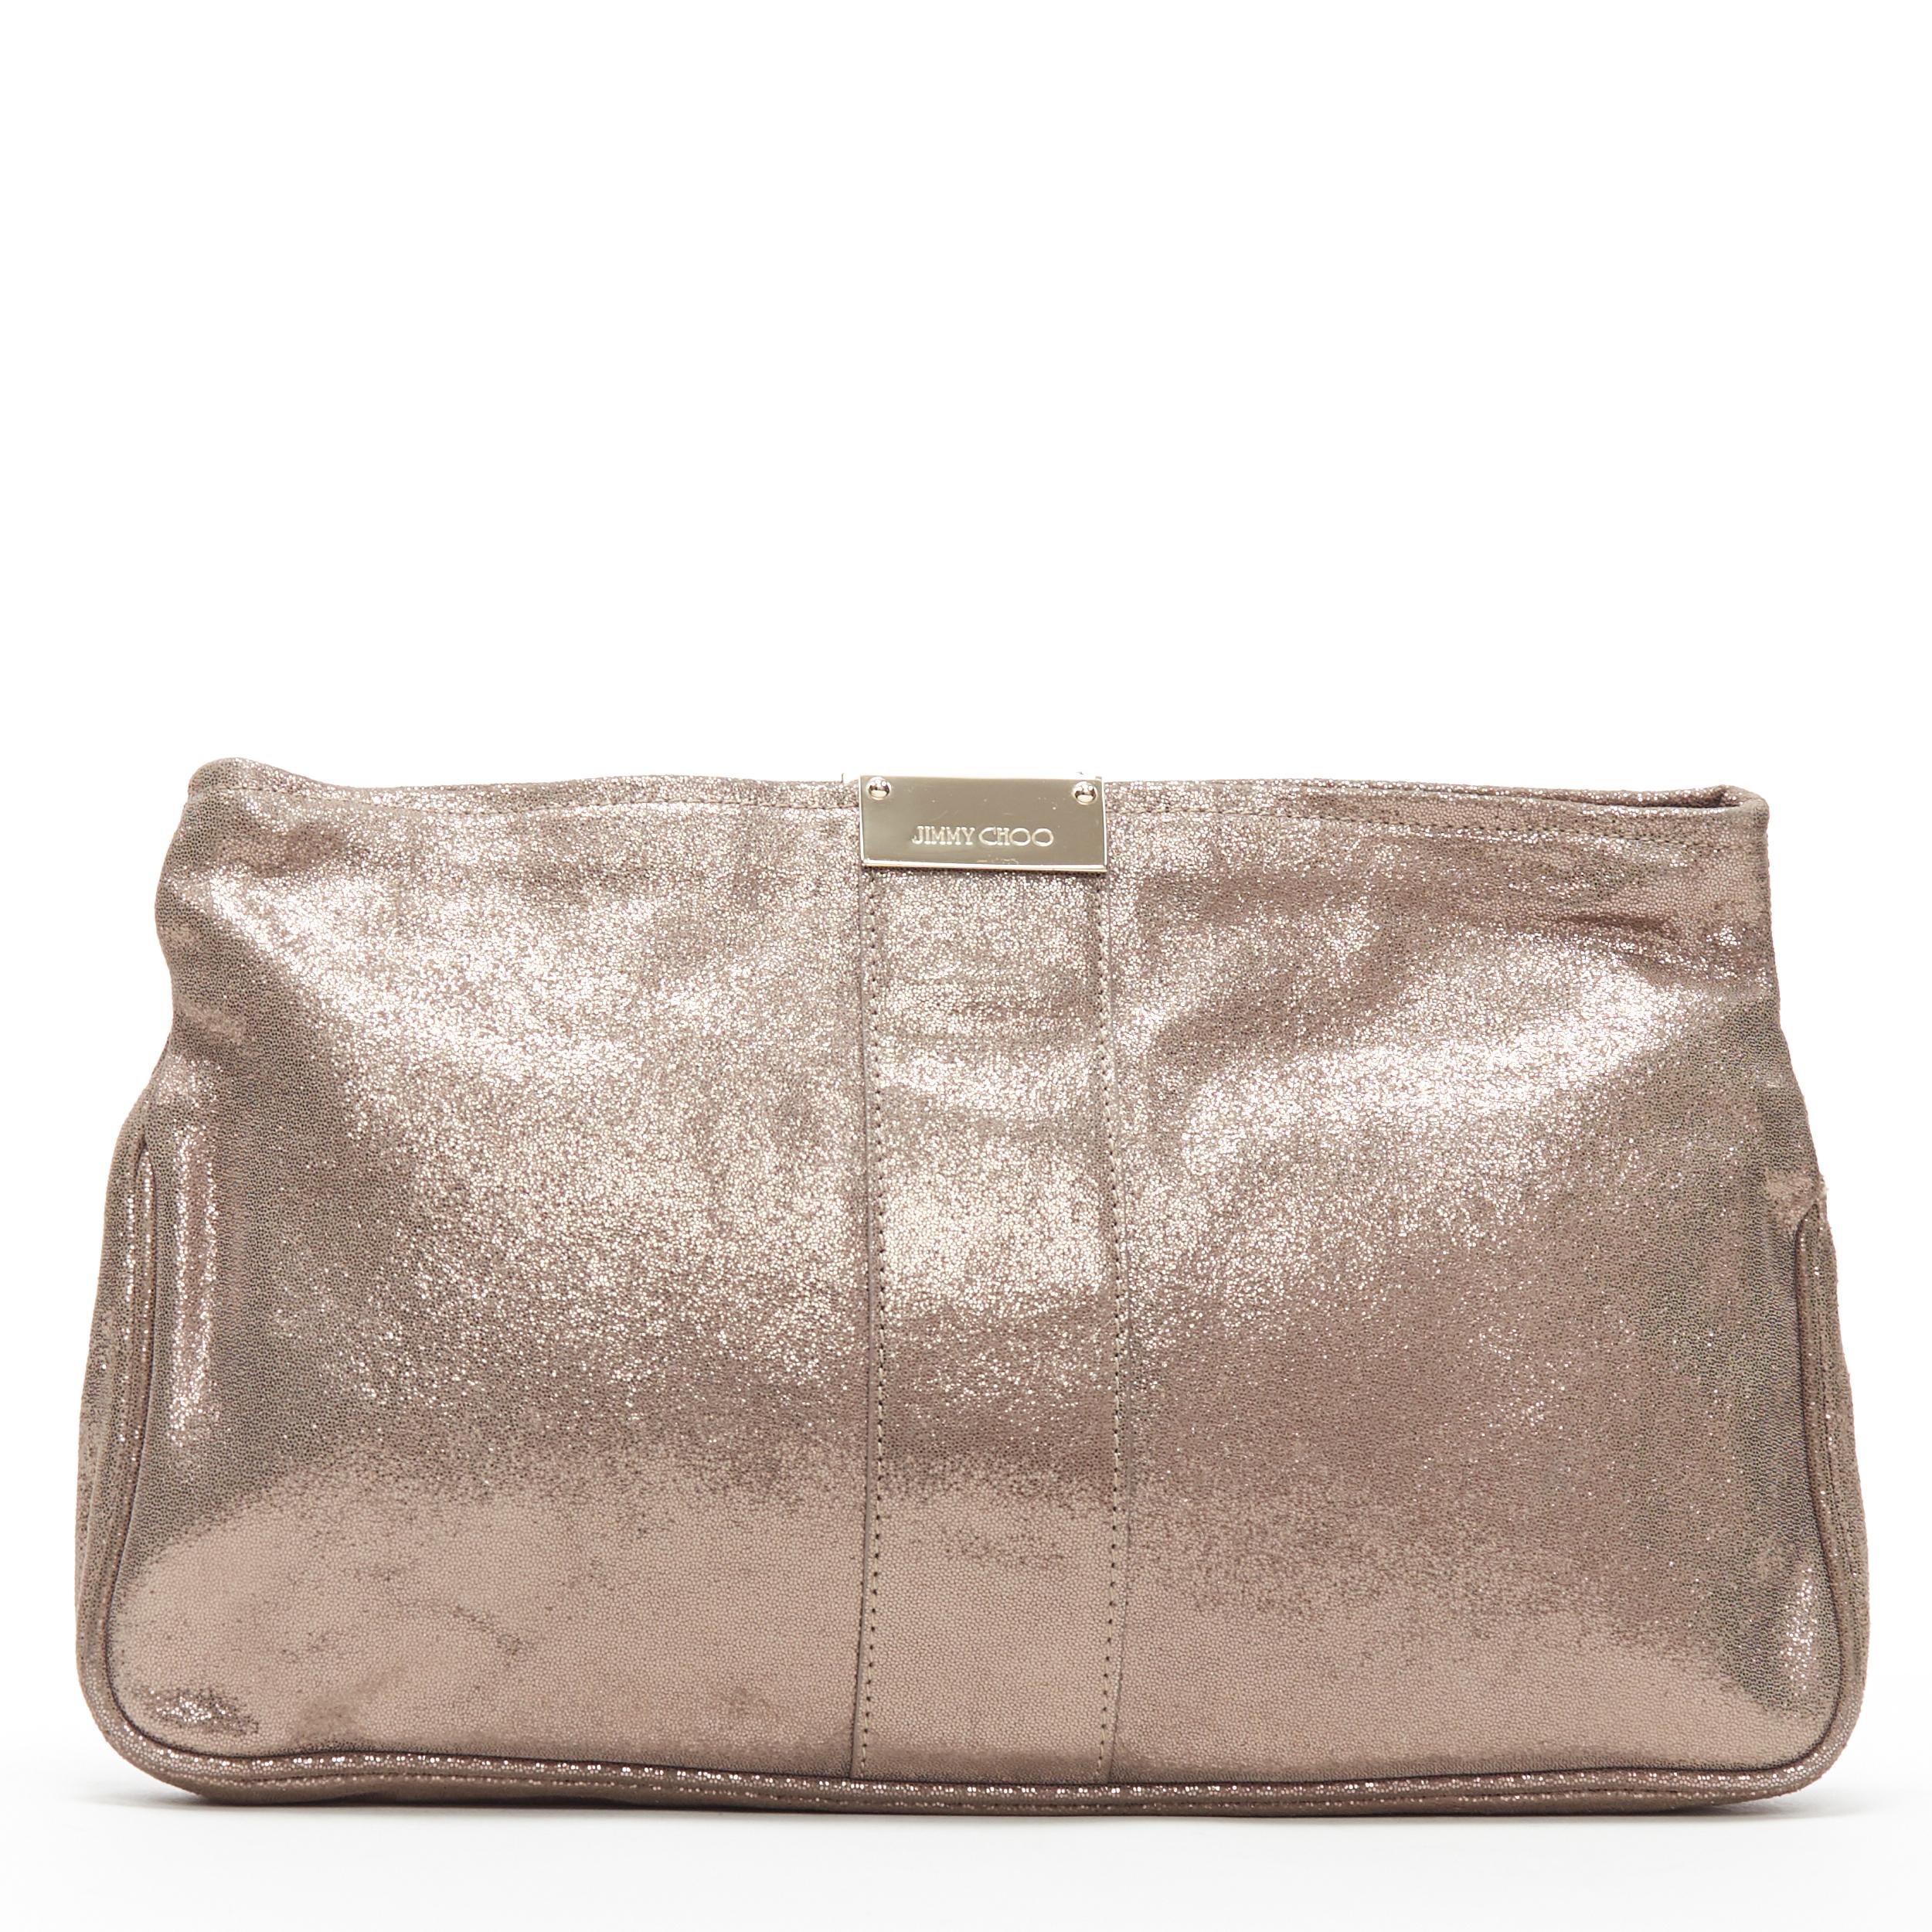 JIMMY CHOO metallic gold leather logo buckle detail top zip pouch zip clutch bag
Brand: Jimmy Choo
Model Name / Style: Zip clutch
Material: Leather
Color: Gold
Pattern: Solid
Closure: Zip
Extra Detail:
Made in: Italy

CONDITION: 
Condition: